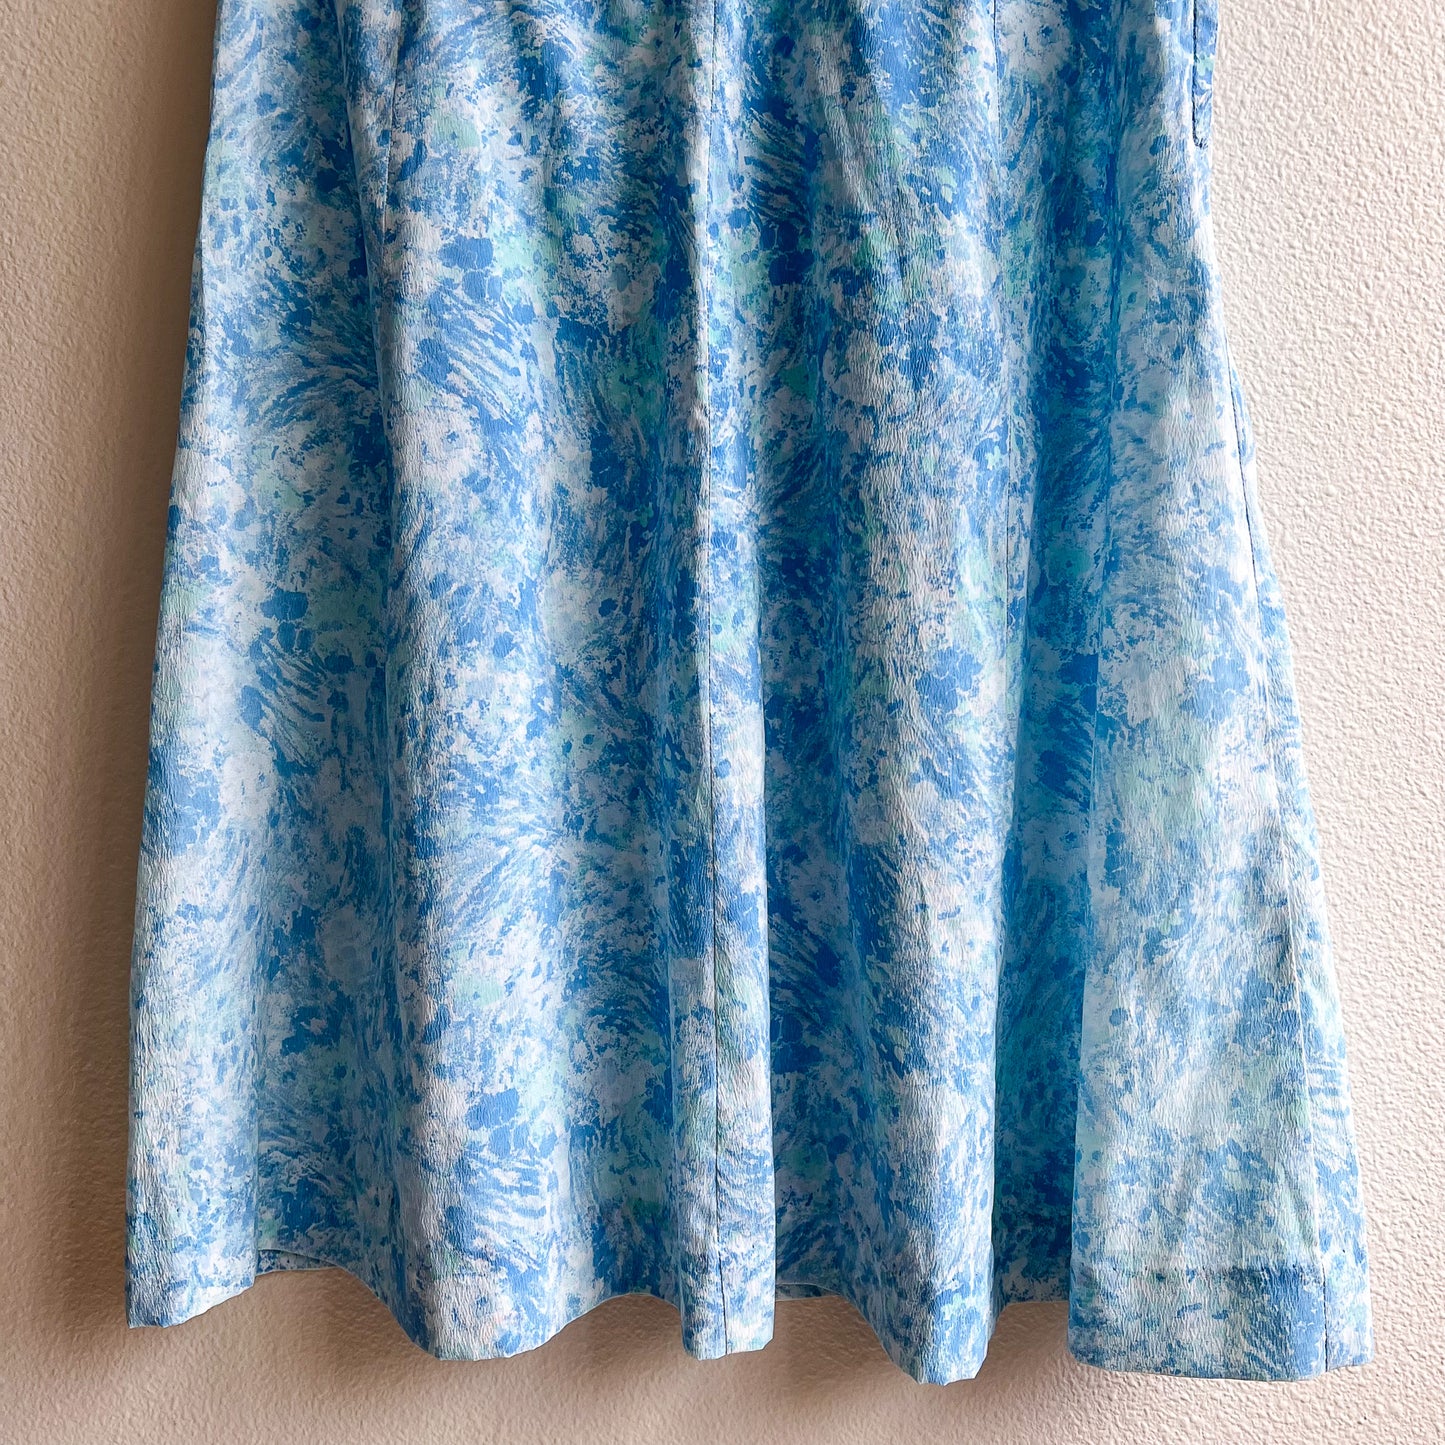 1950s Sky Blue Abstract Print Buttoned Dress (L/XL)